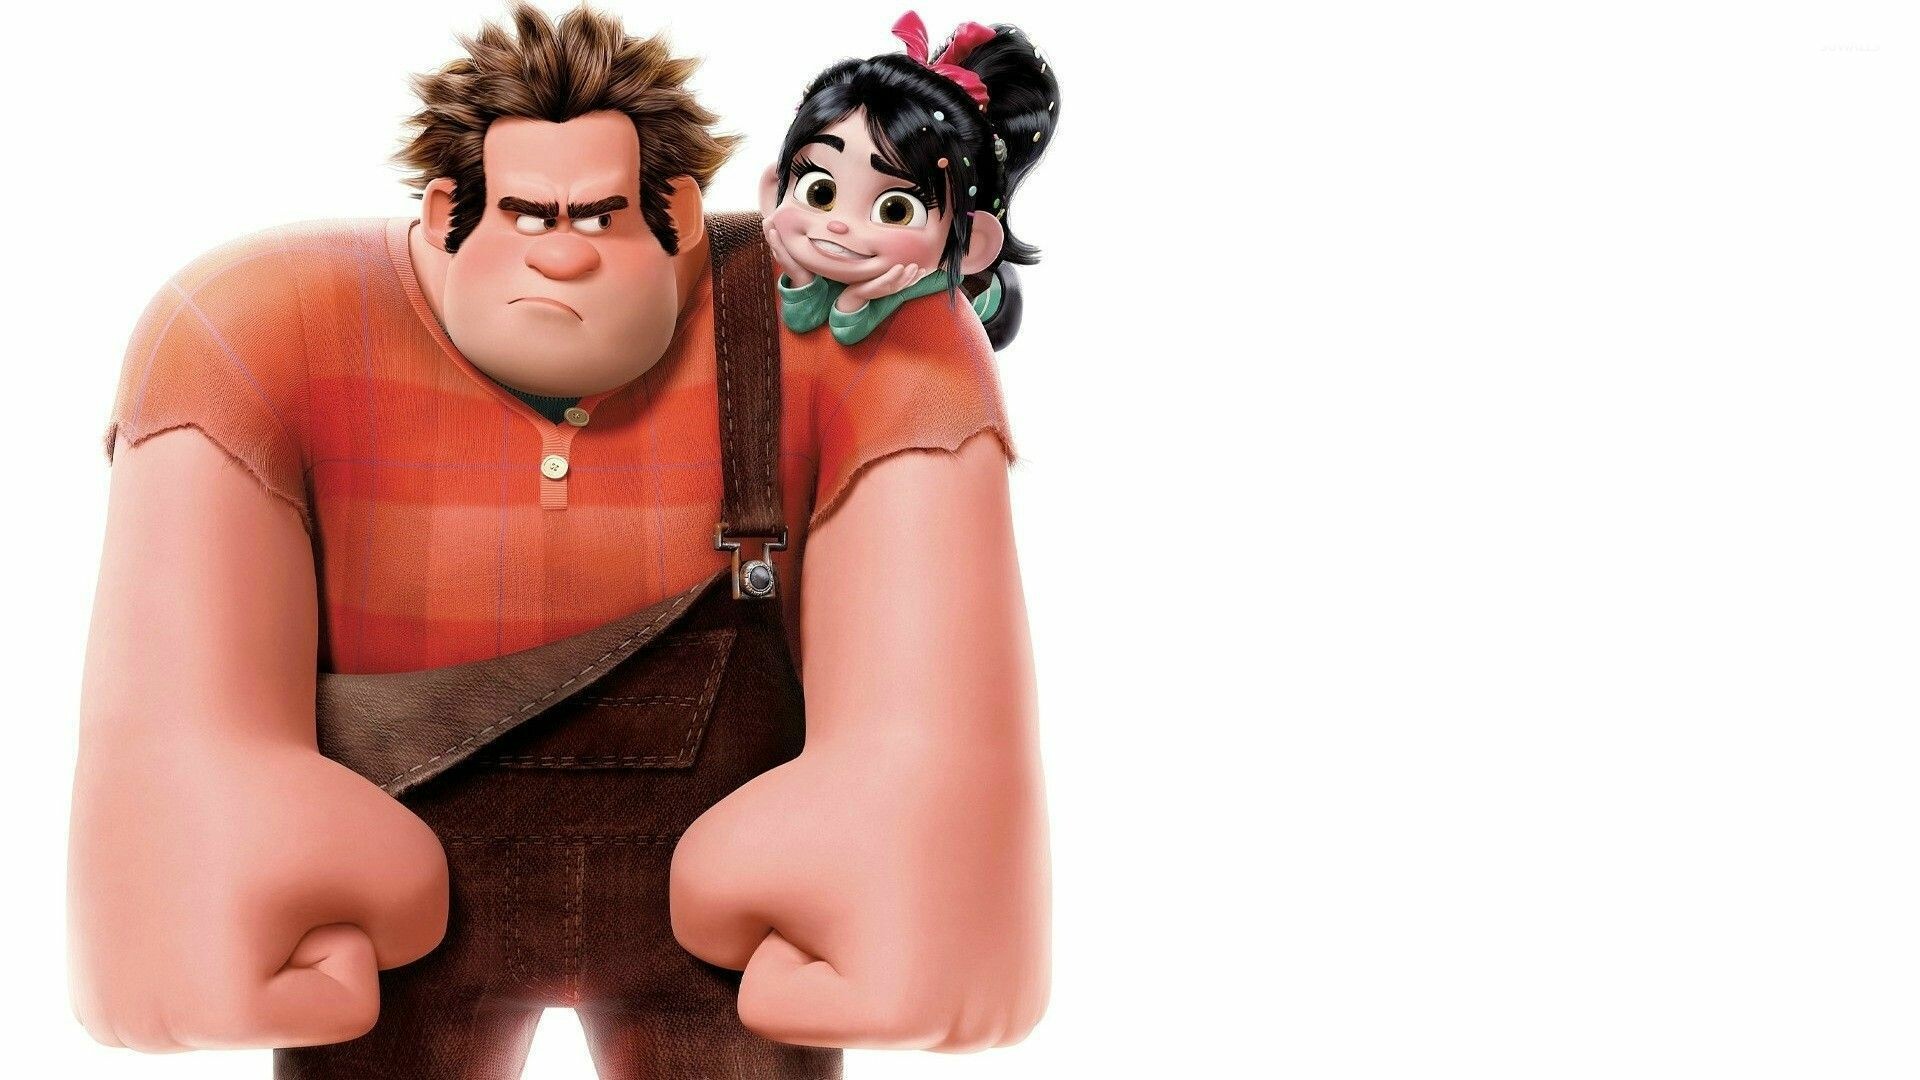 Wreck-It Ralph: The bad guy of Fix-It Felix Jr. with superhuman strength, Vanellope. 1920x1080 Full HD Background.